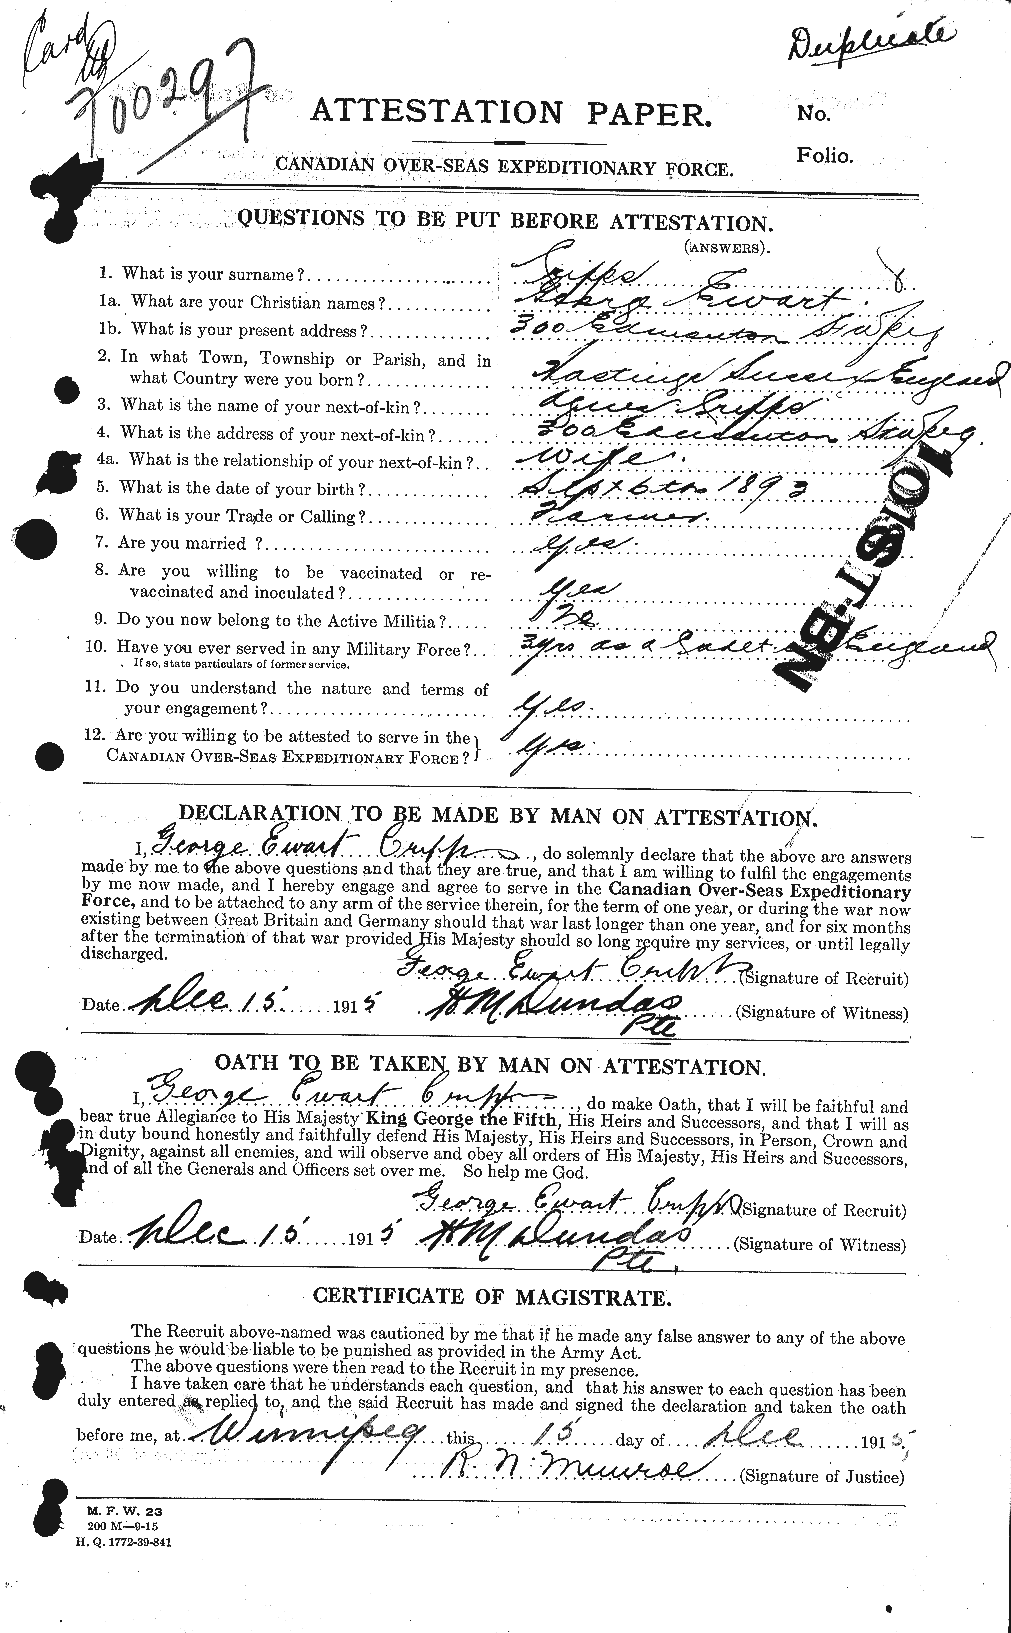 Personnel Records of the First World War - CEF 065446a